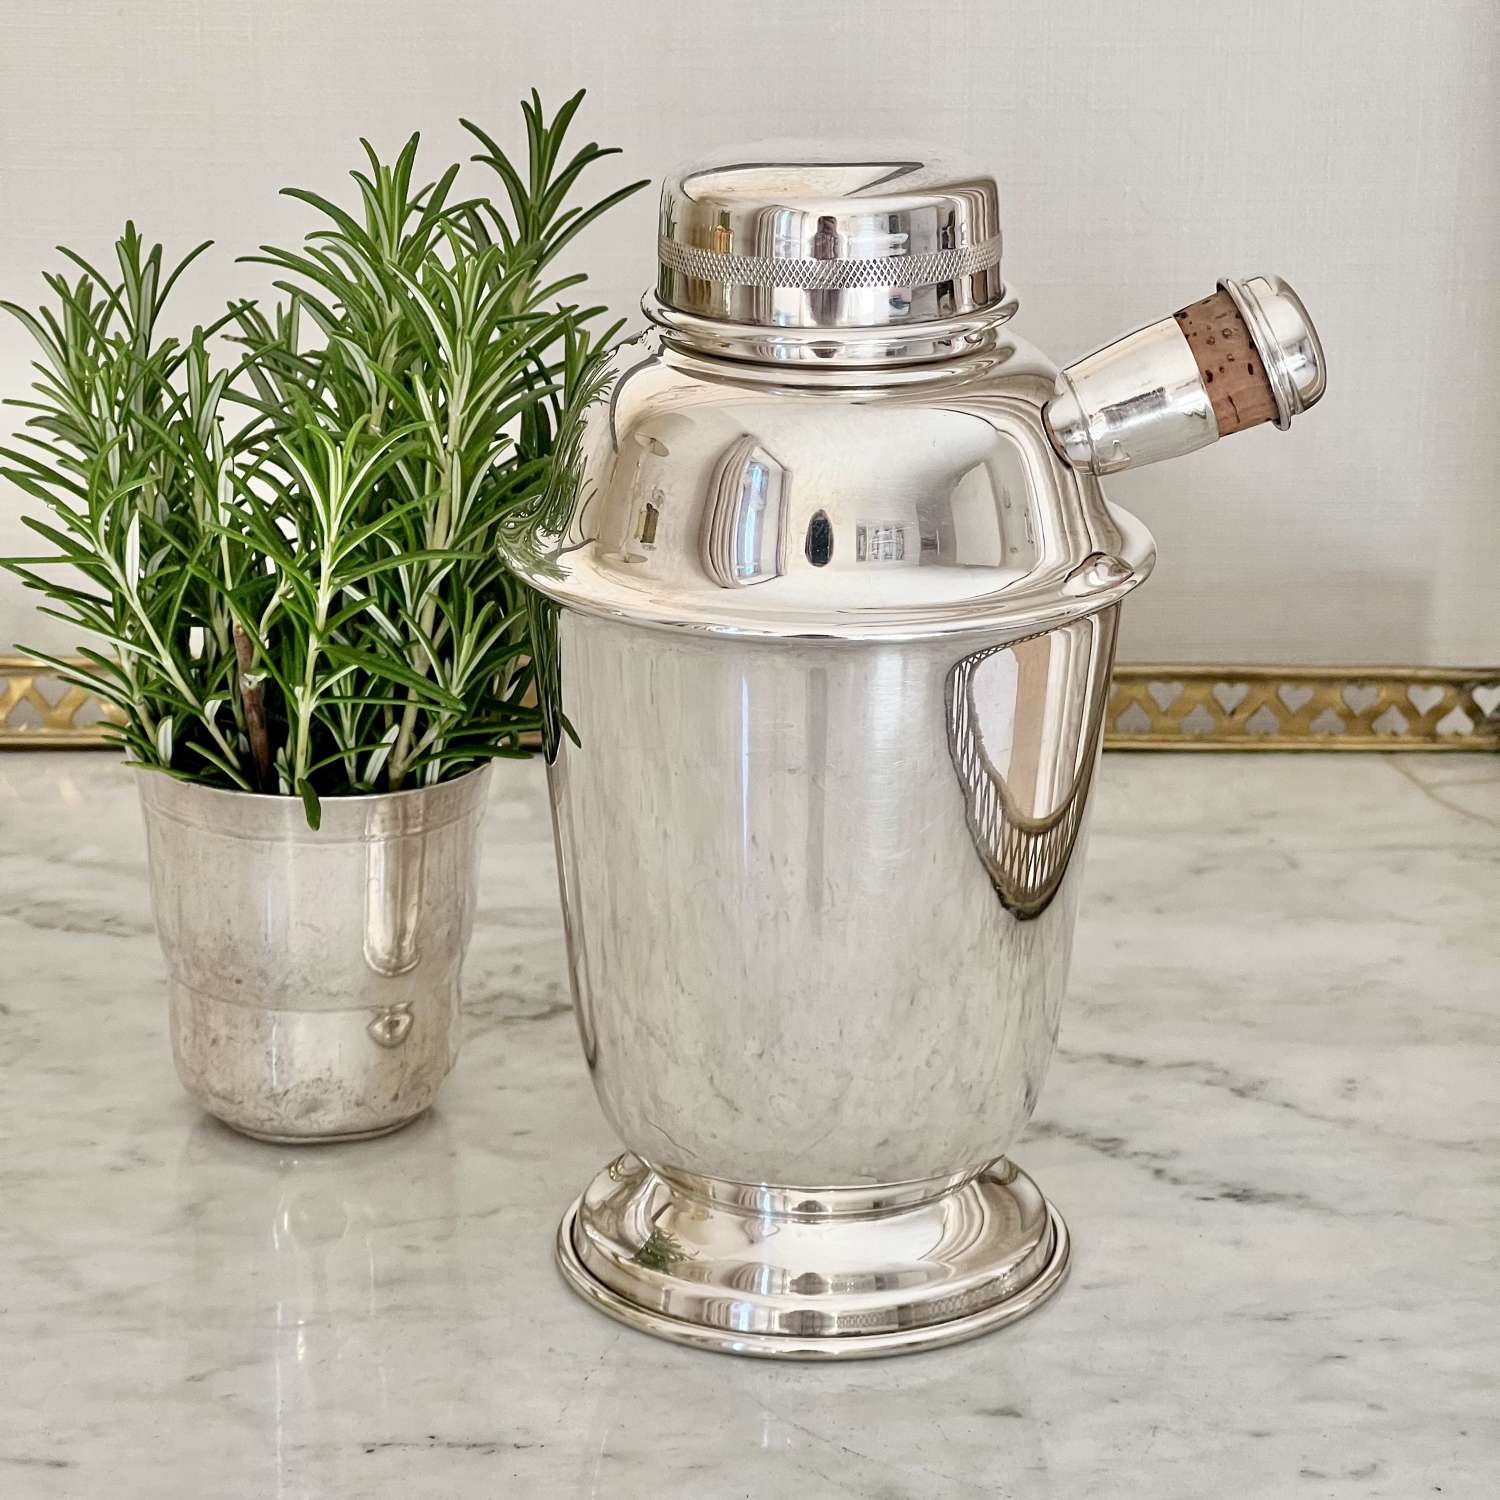 Nifty Art Deco Side Spout Cocktail Shaker With Cork Stopper